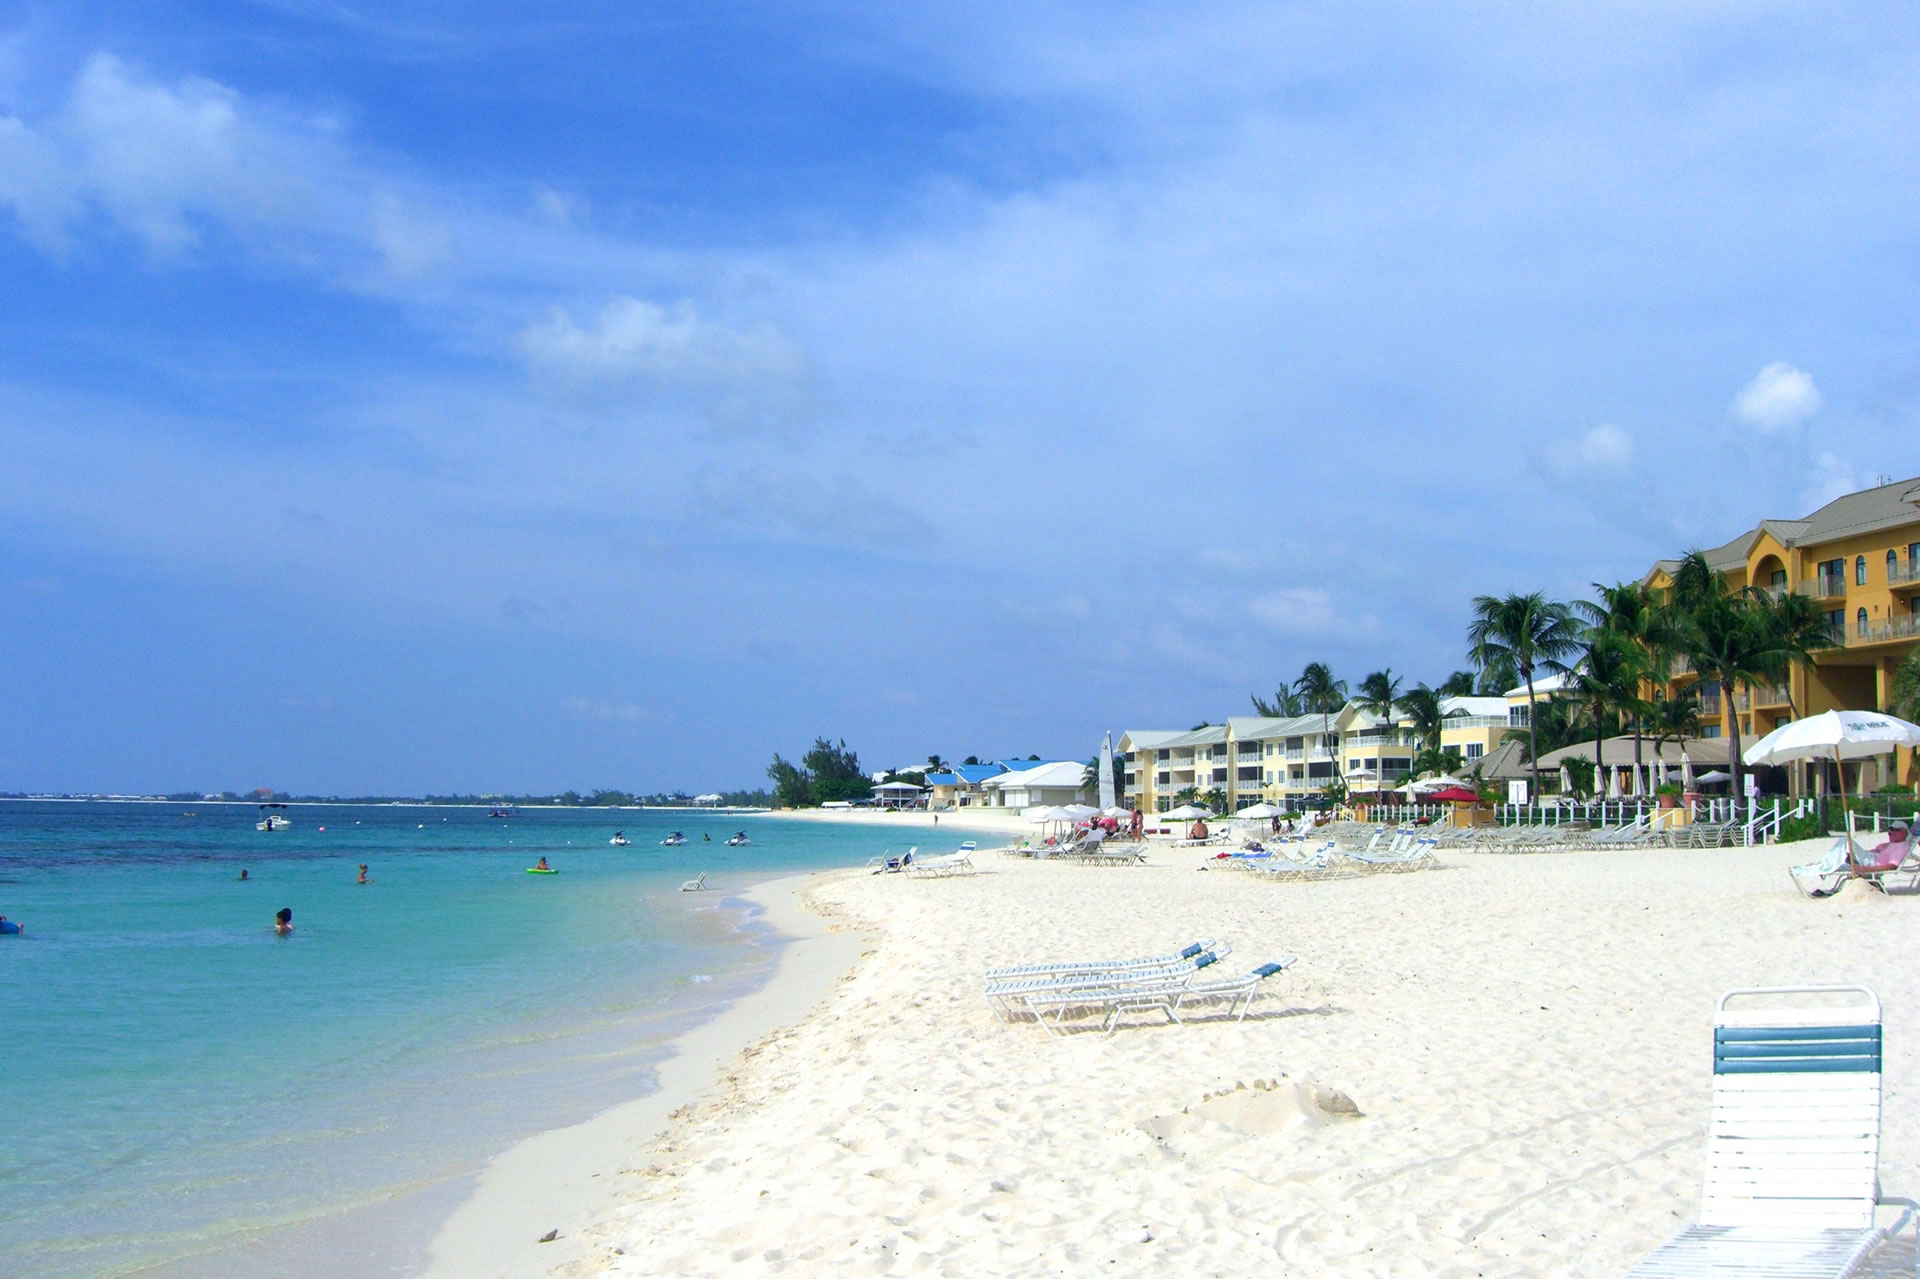 Resorts lining the white sand beaches of Grand Cayman's Seven Mile Beach.